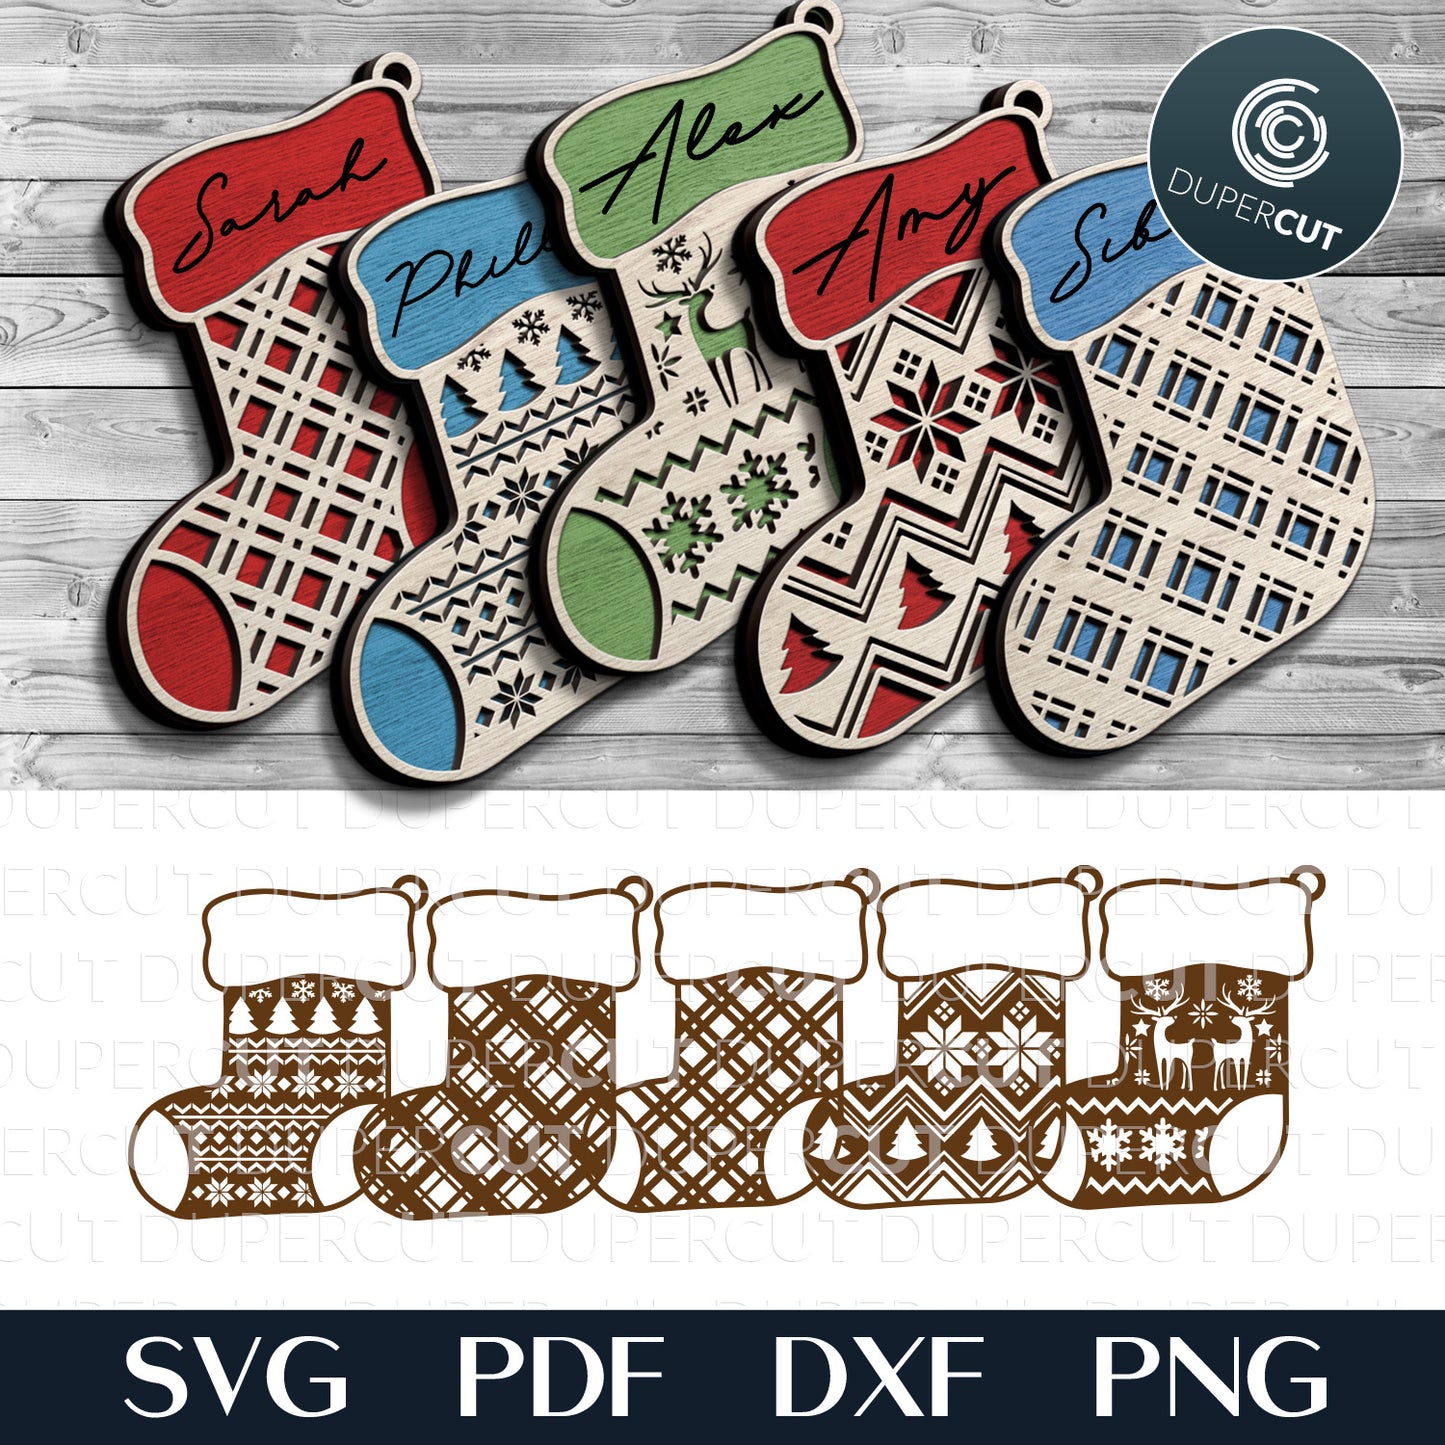 Christmas stockings personalized decoration tag, layered SVG files for laser machines, Glowforge, Xtool, Cricut, CNC plasma by www.DuperCut.com